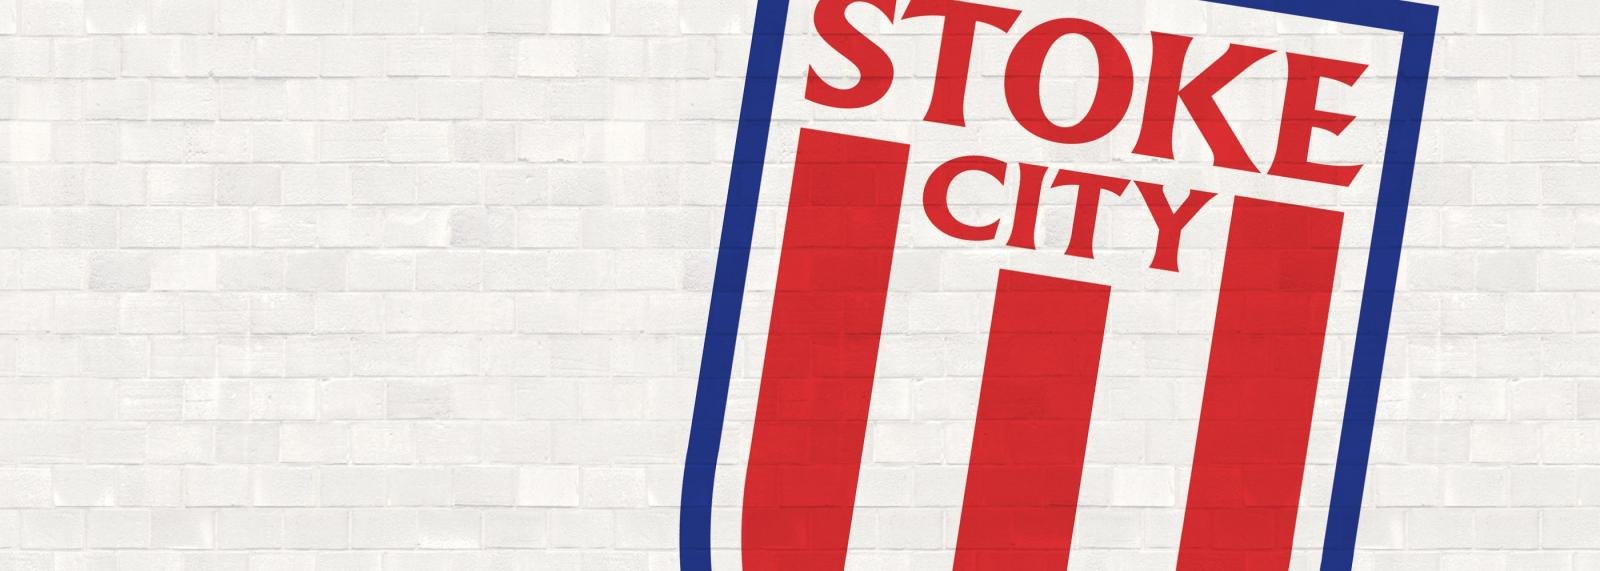 Stoke City: 3 things we’ve learnt from their season so far…